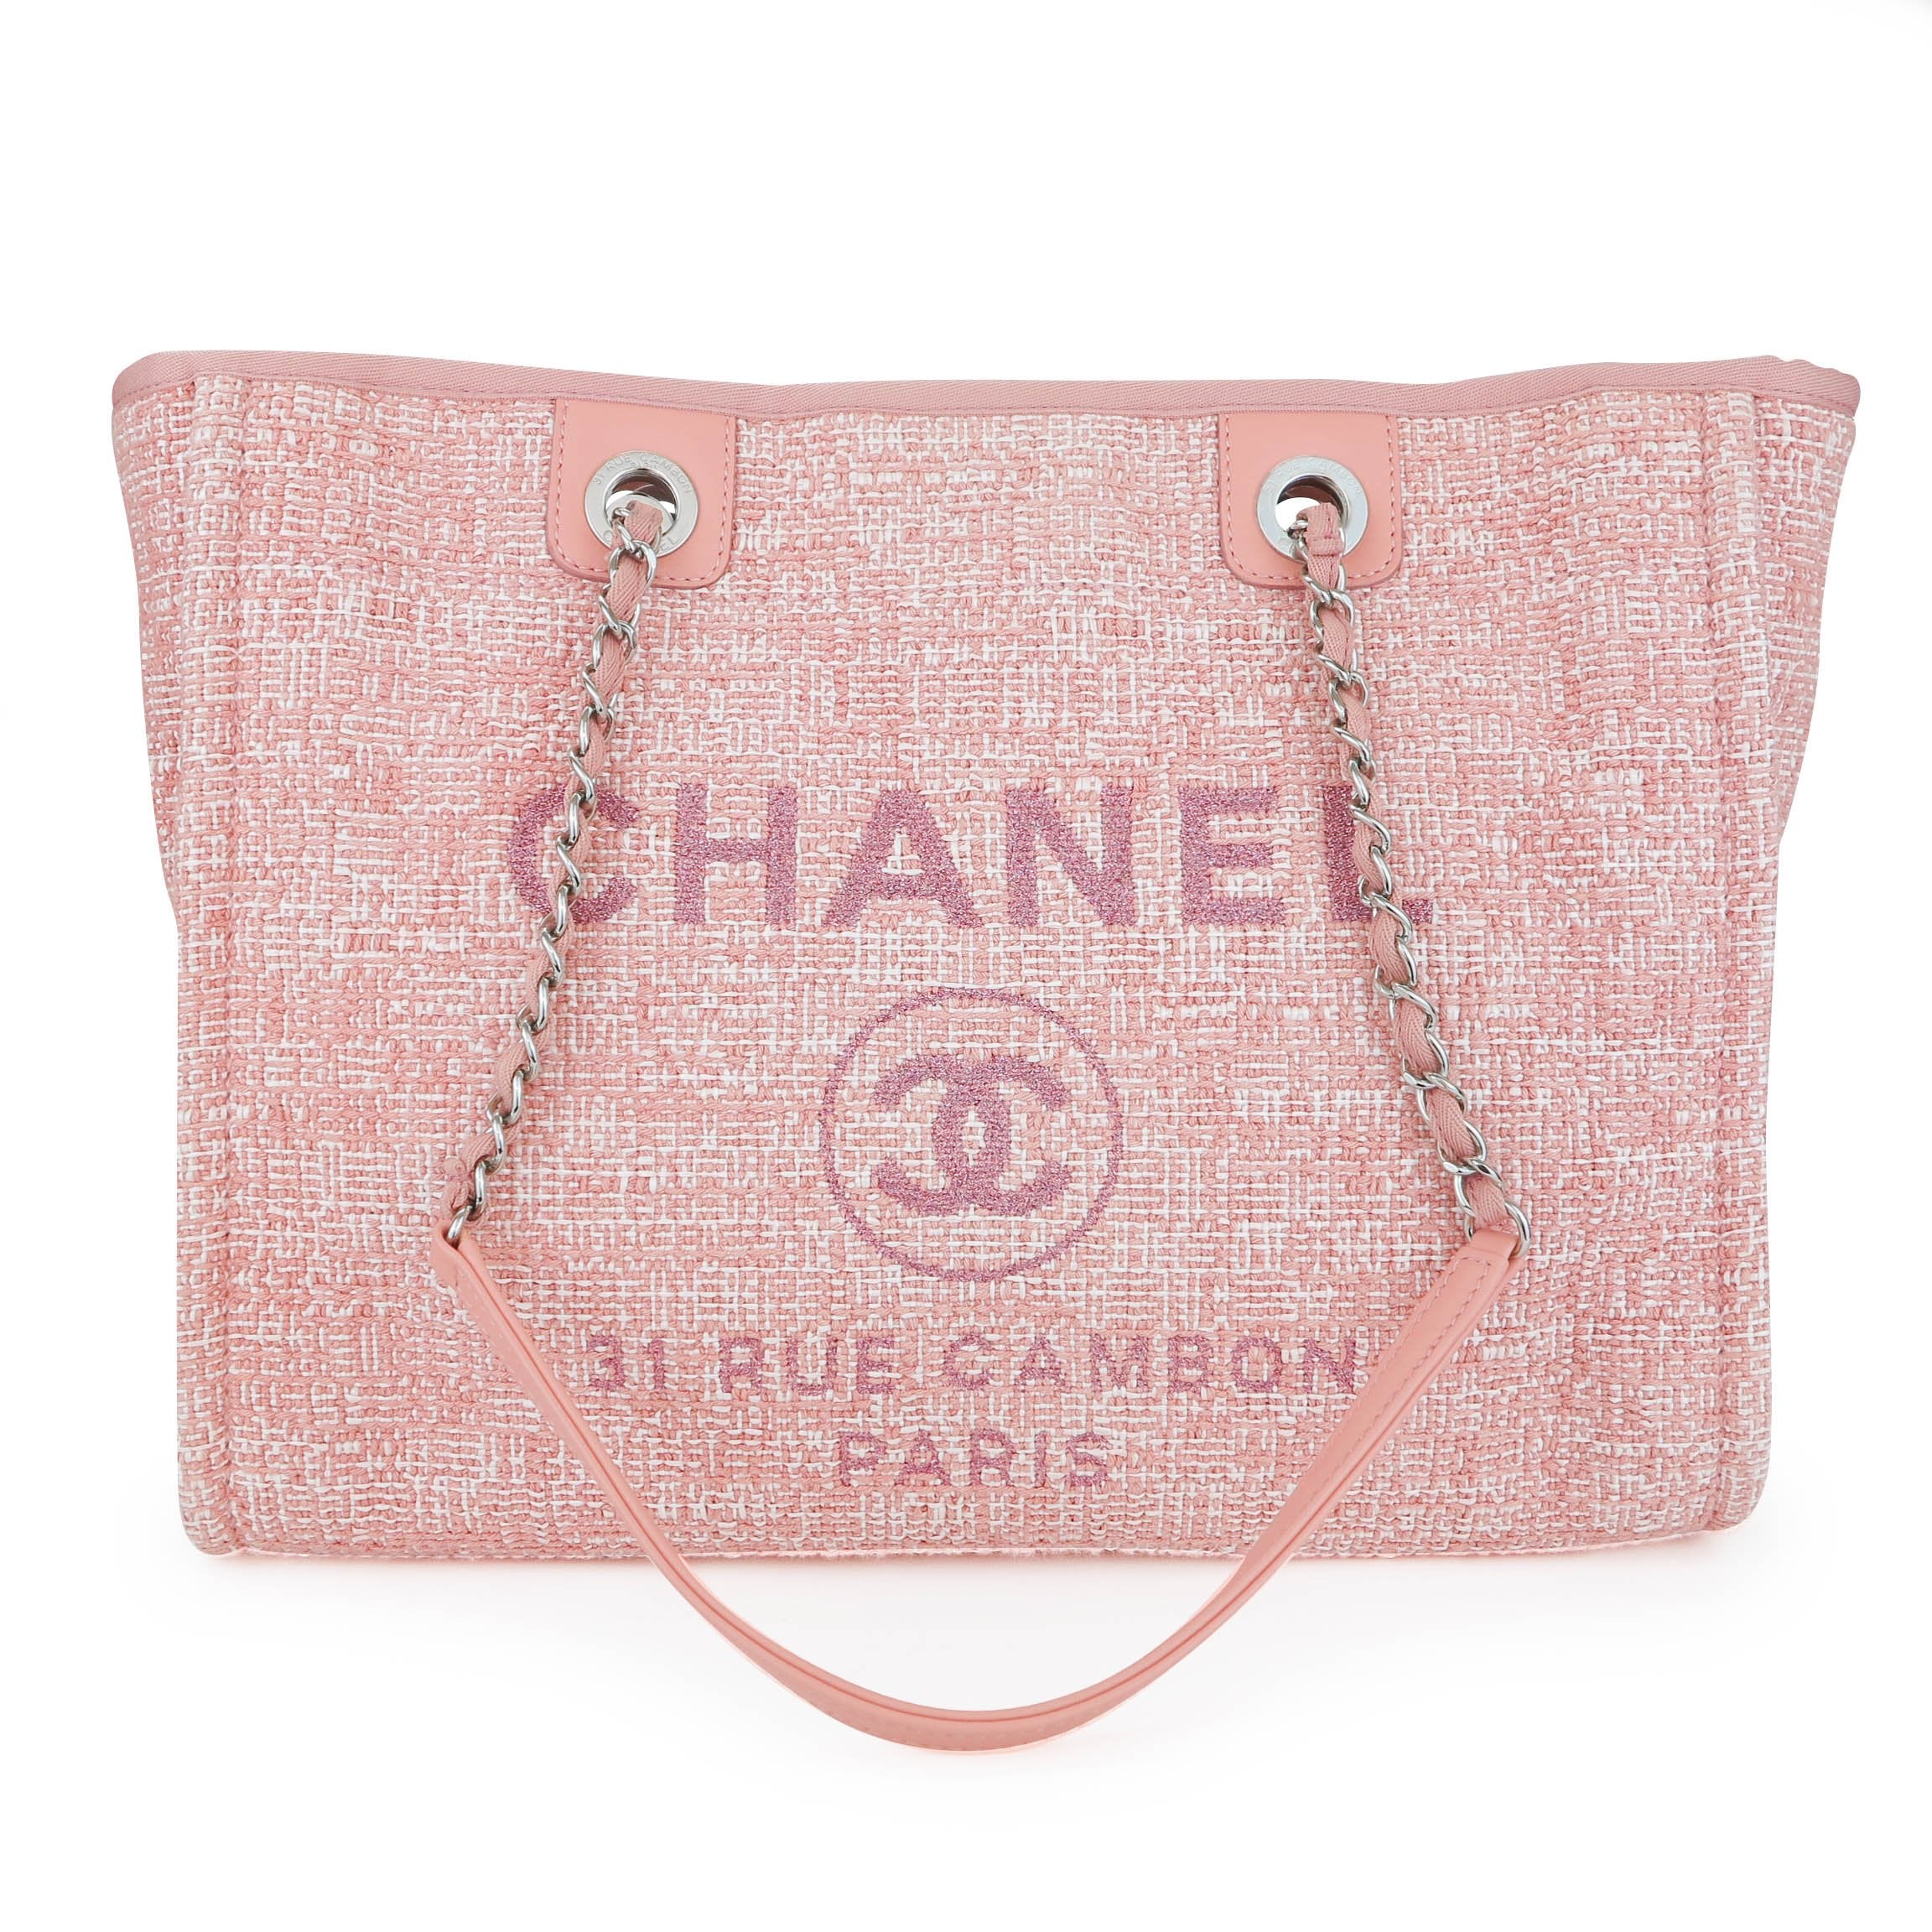 CHANEL Small Glitter Deauville Tote Bag in Pink Canvas